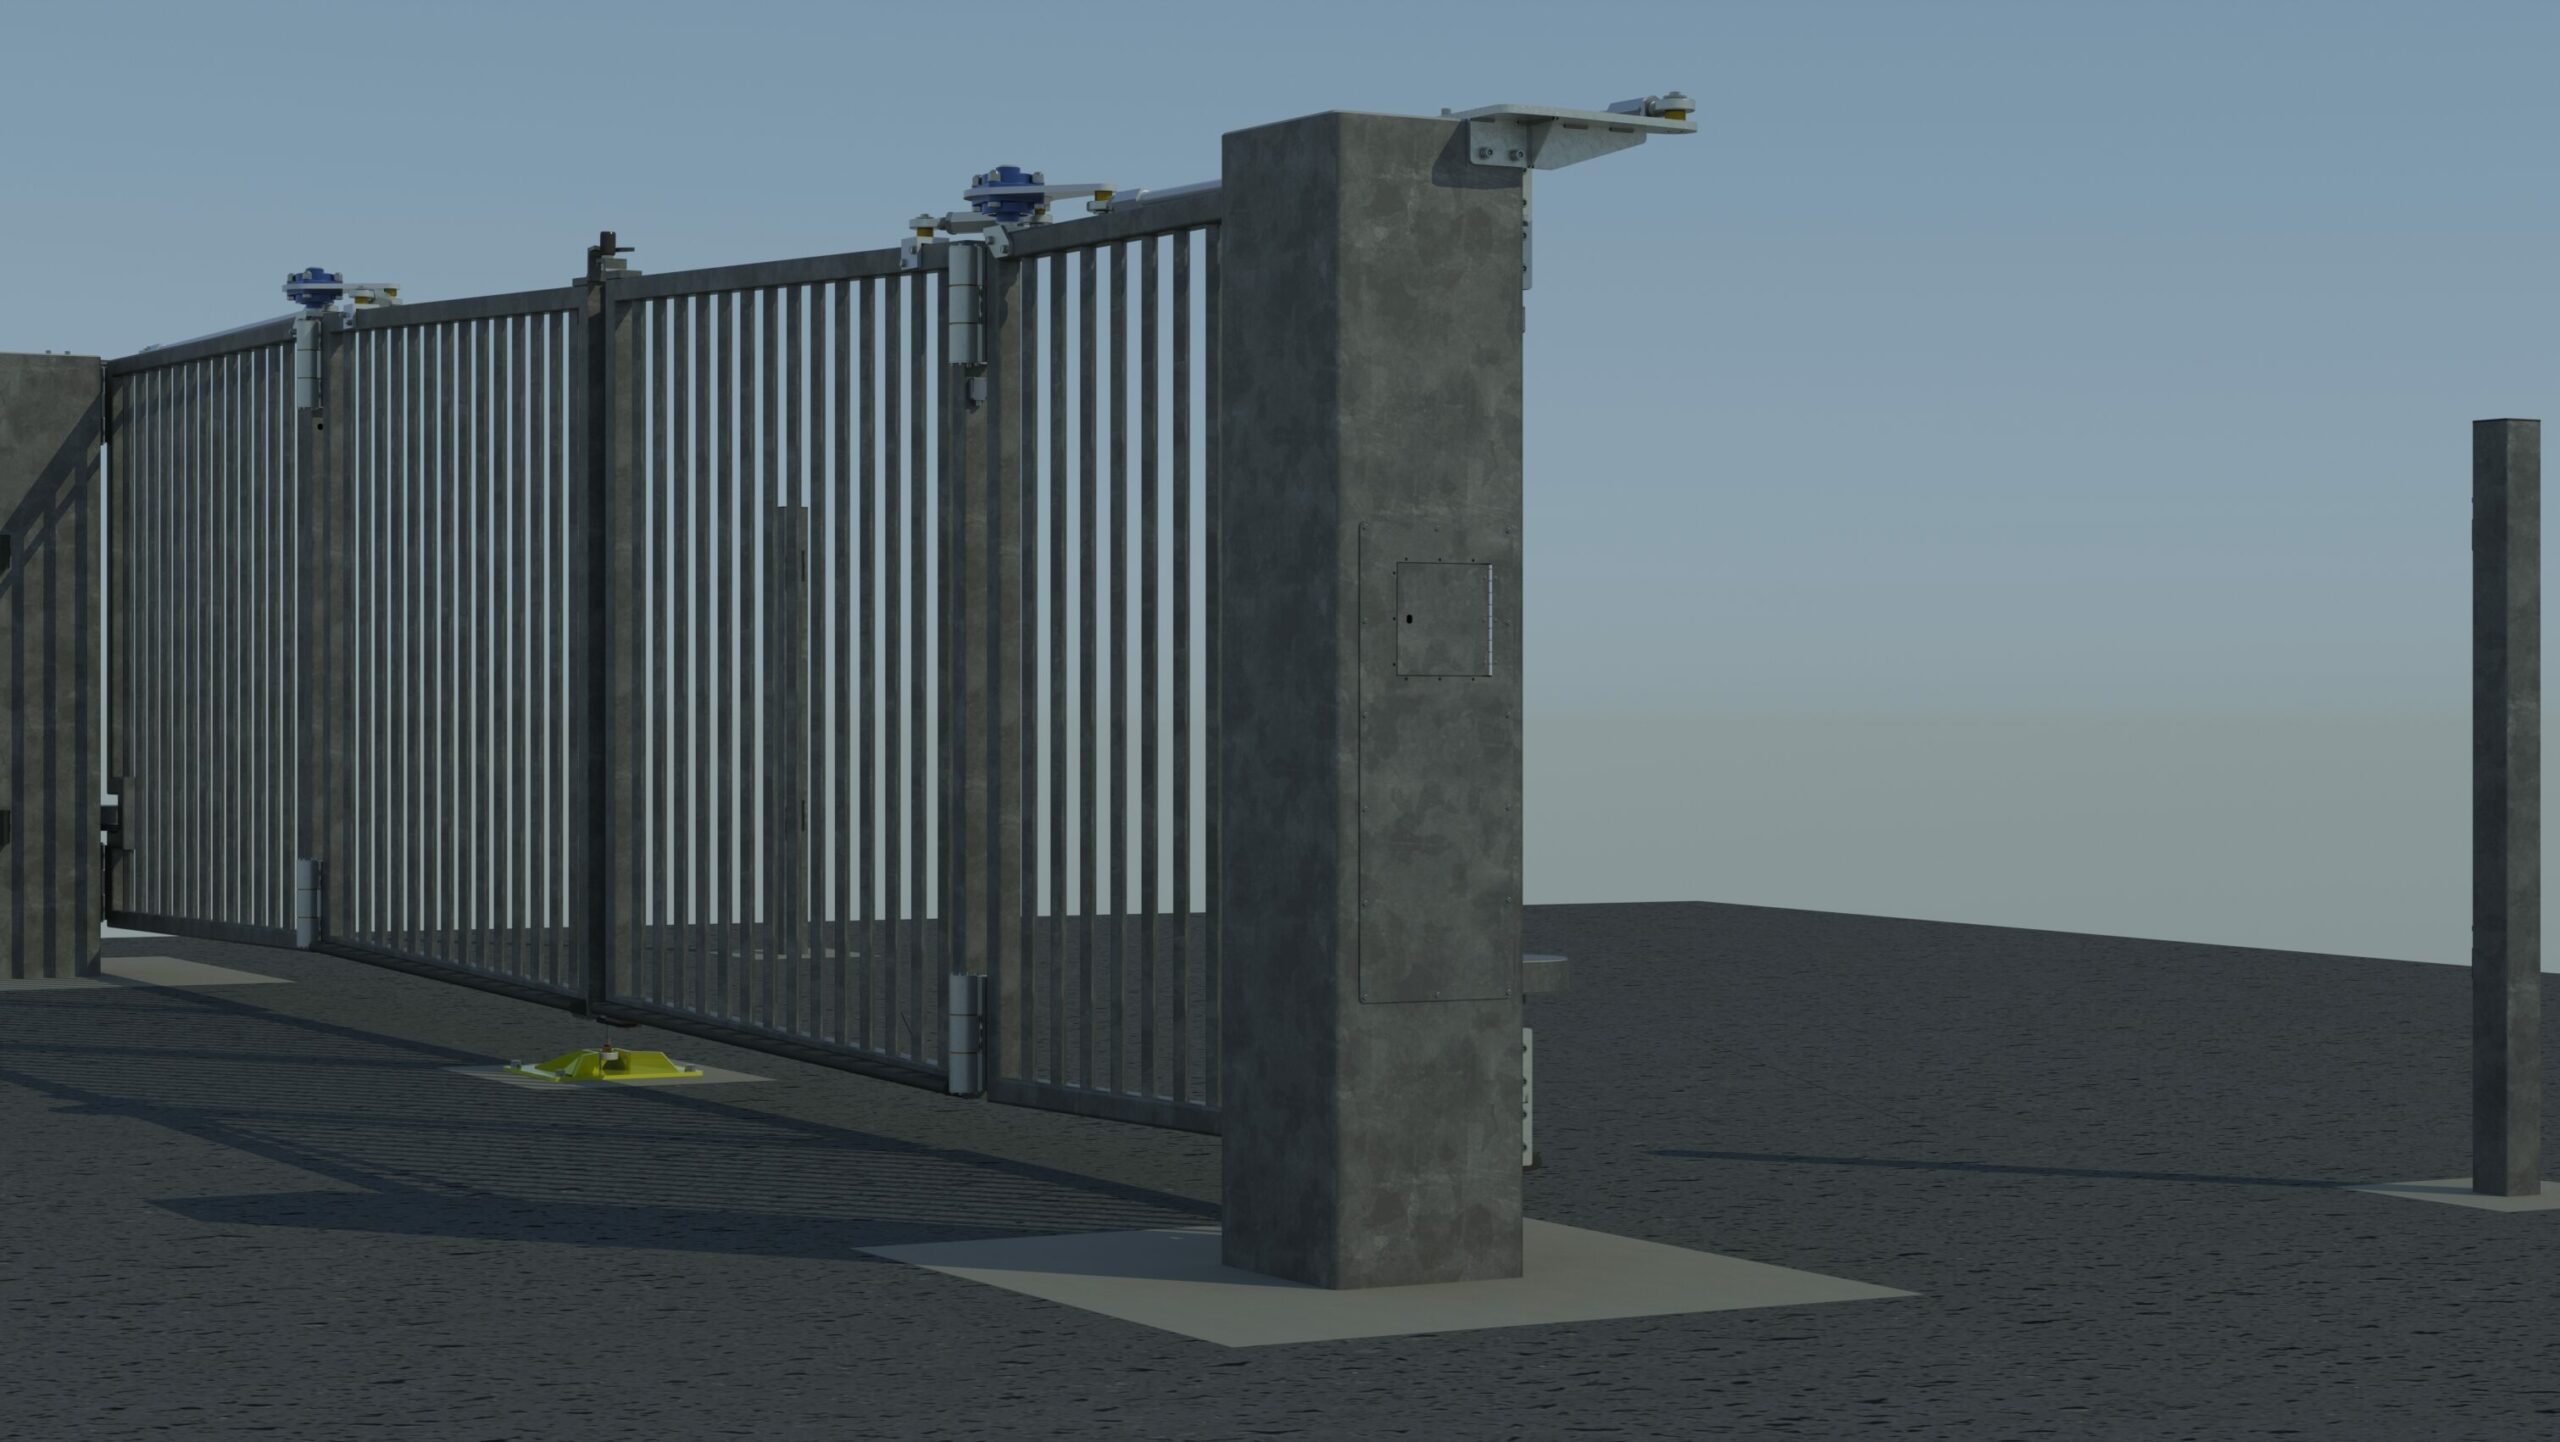 Engineering rendering of an automatic commercial gate